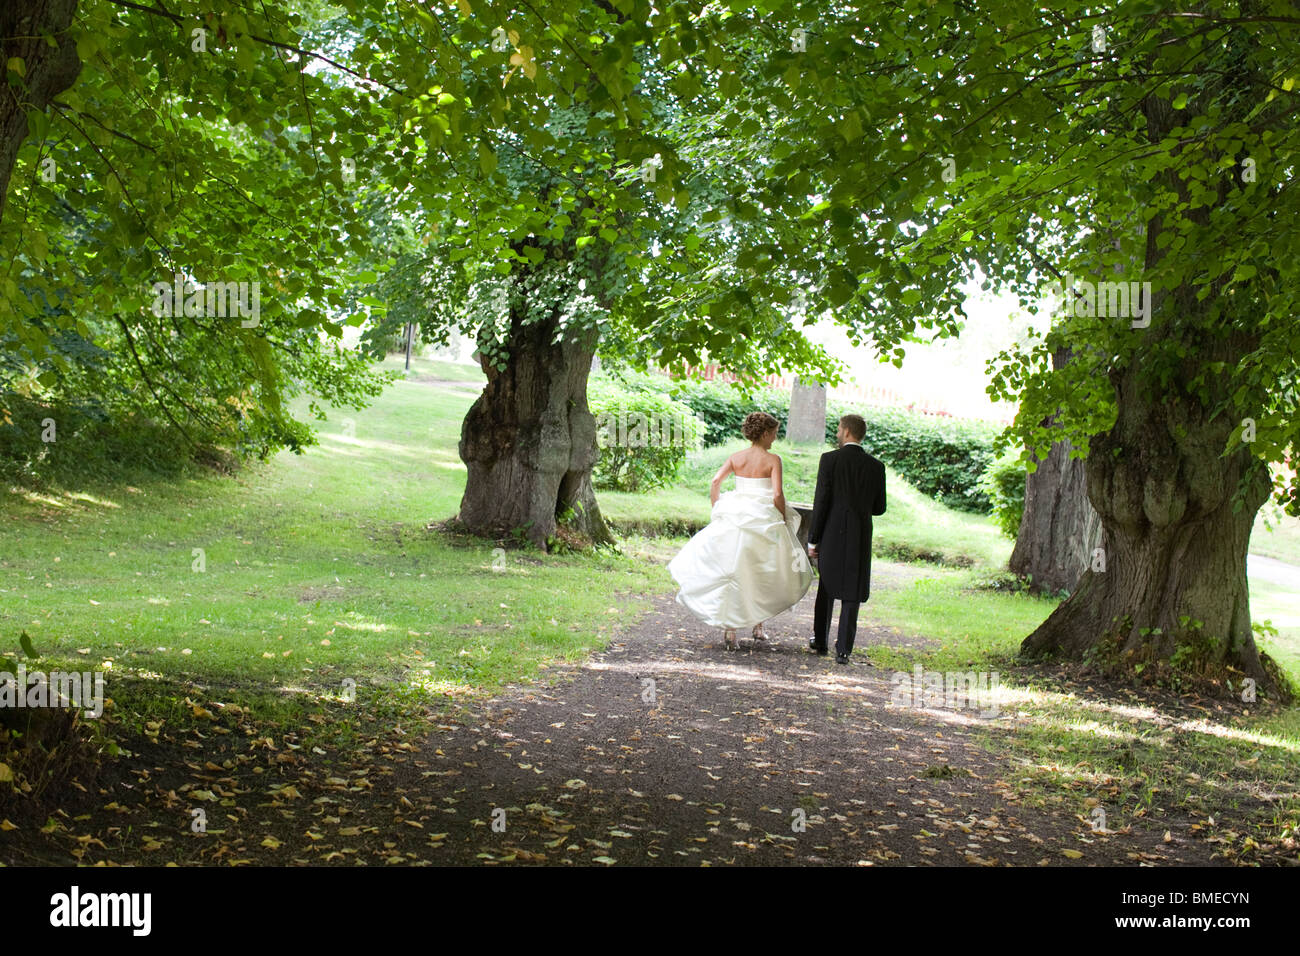 Bride and groom walking in park Stock Photo